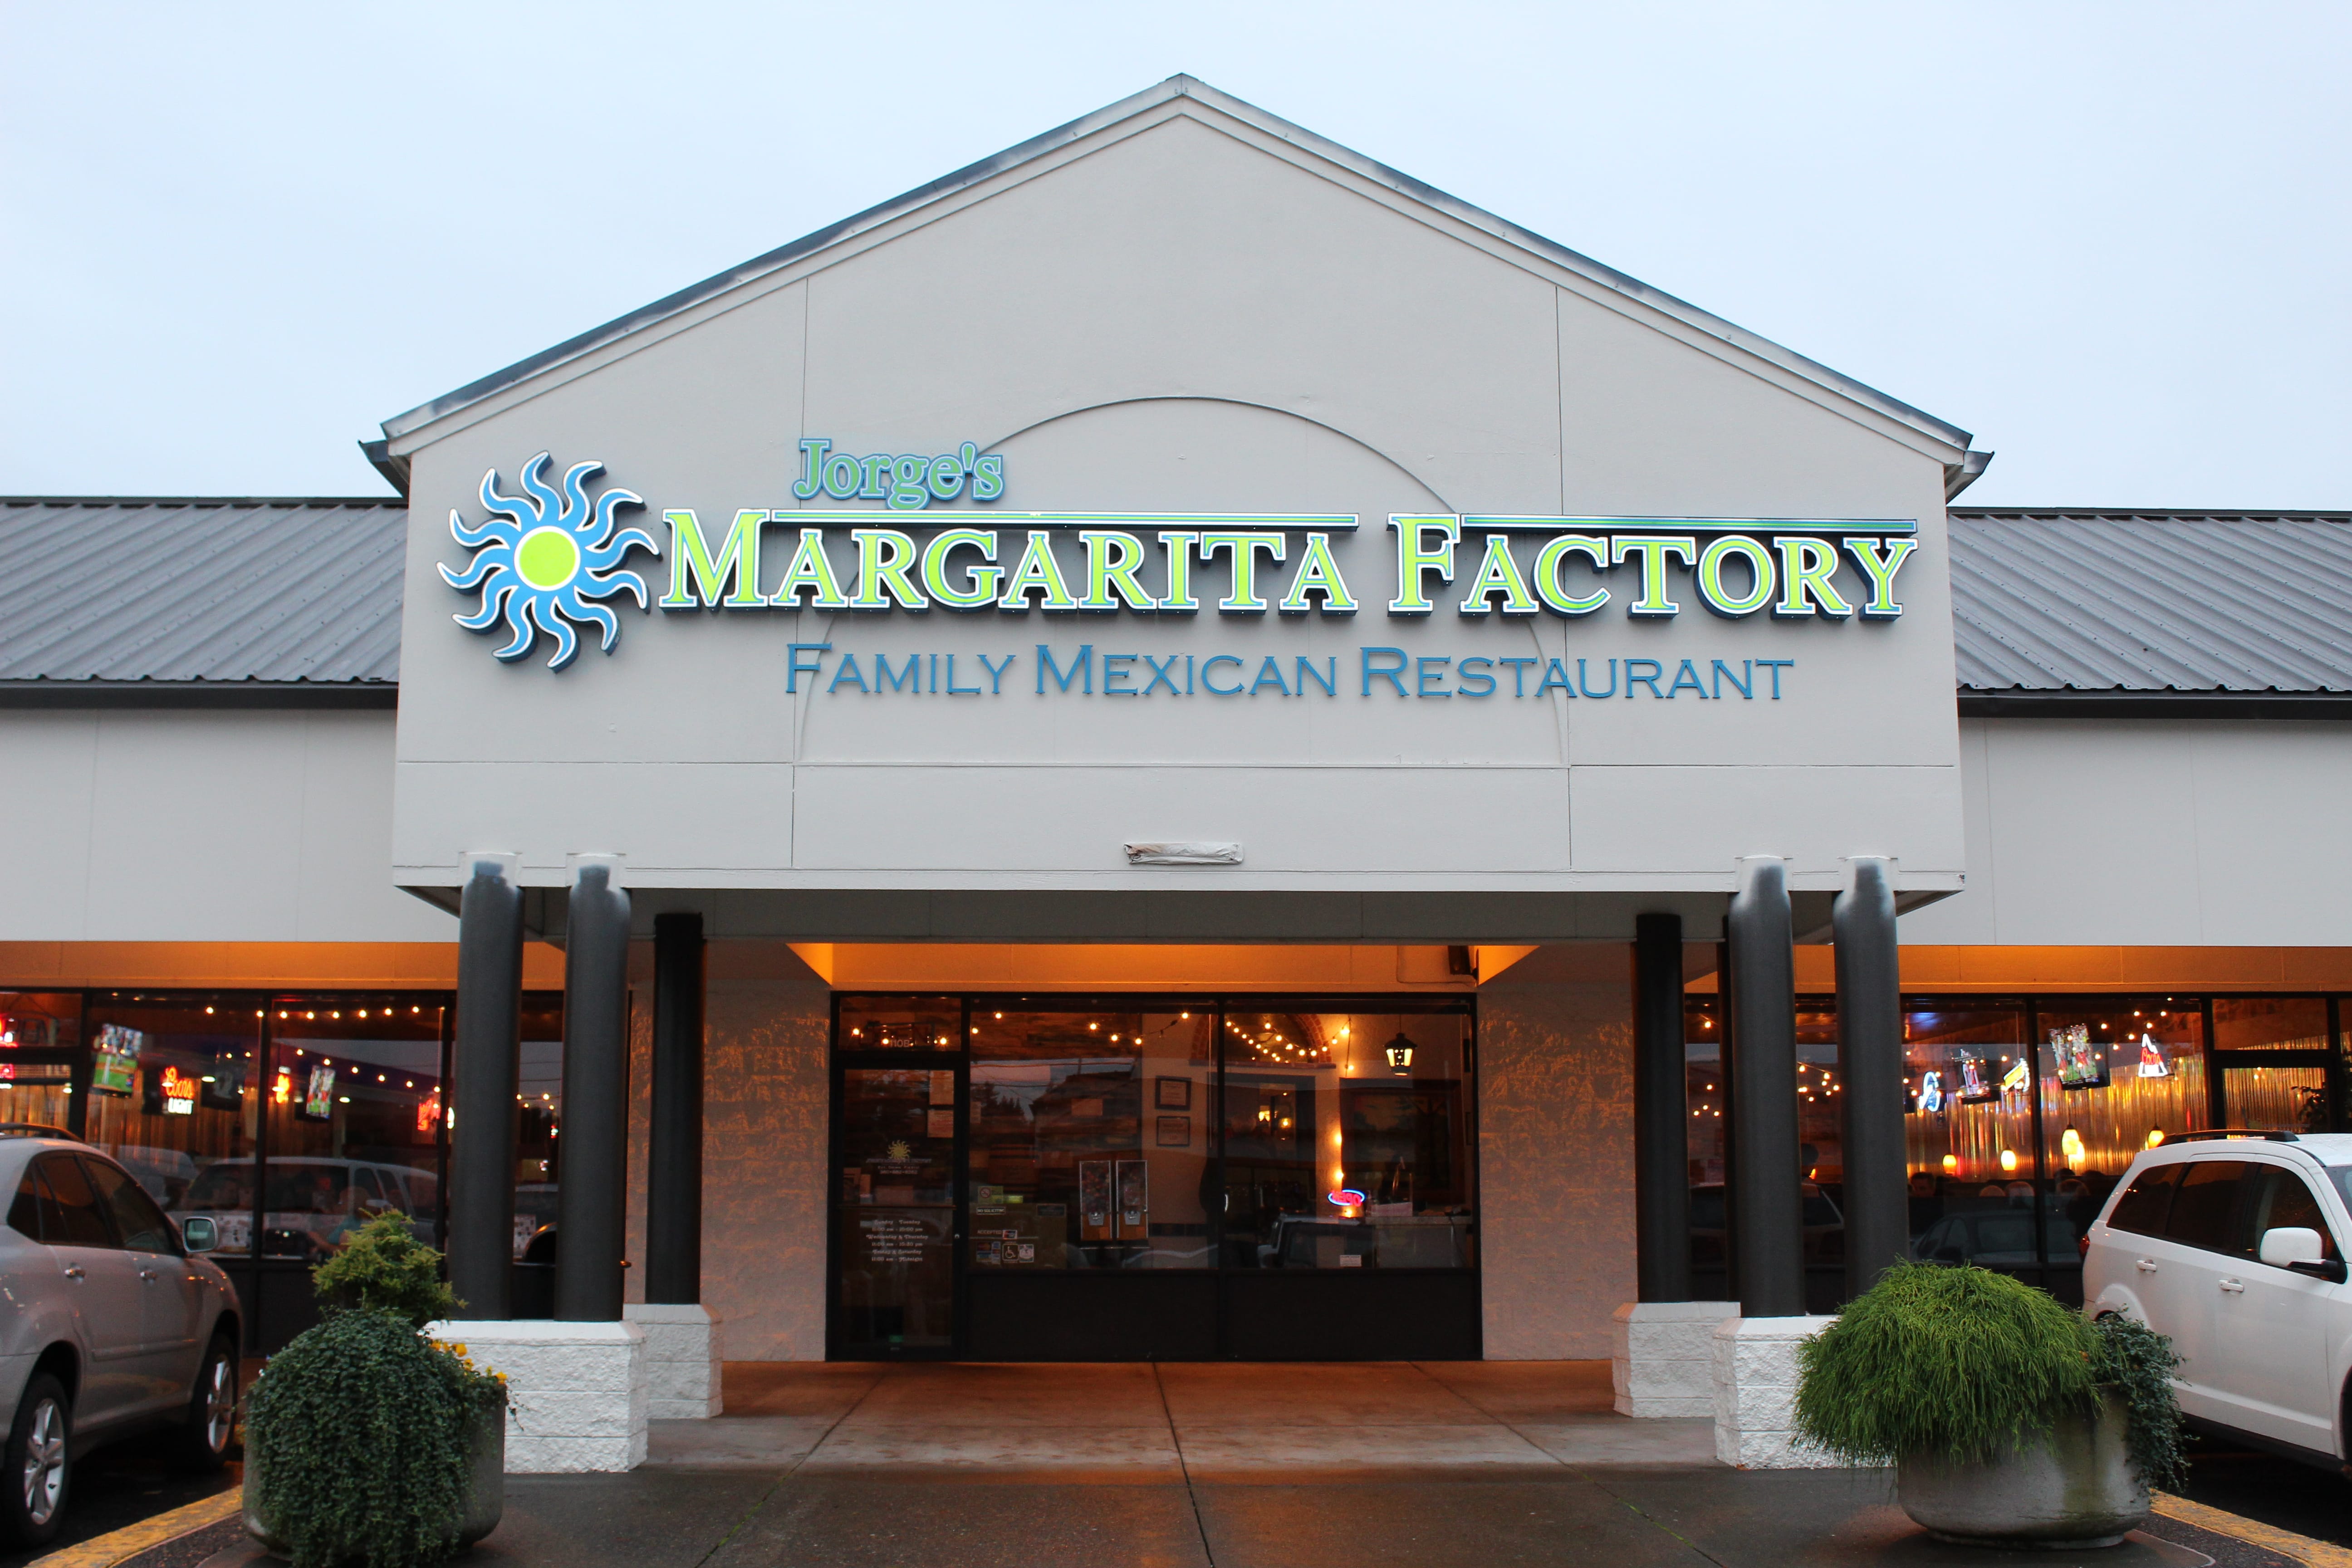 Jorge's Margarita Factory on Mill Plain offers authentic Mexican flare and will soon be a Salsa and Merengue Club on Saturday nights